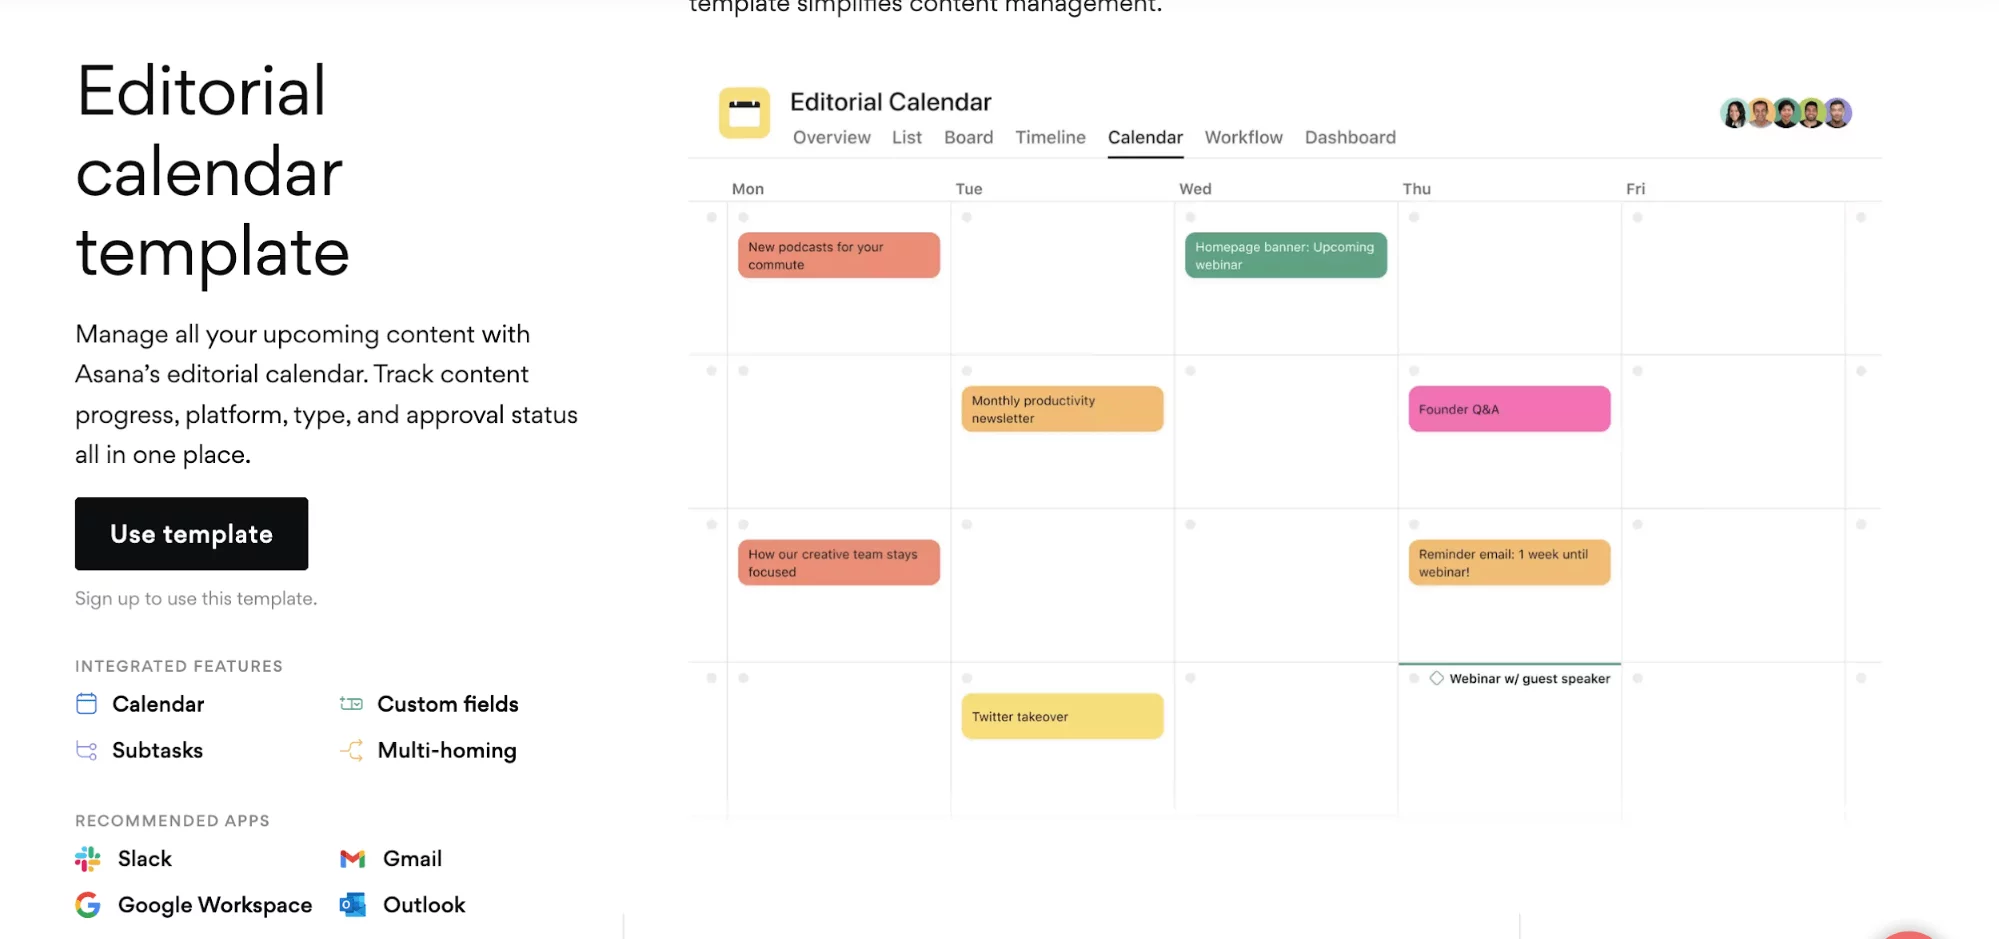 Editorial content calendar template in Asana, with colored labels and team collaborators.